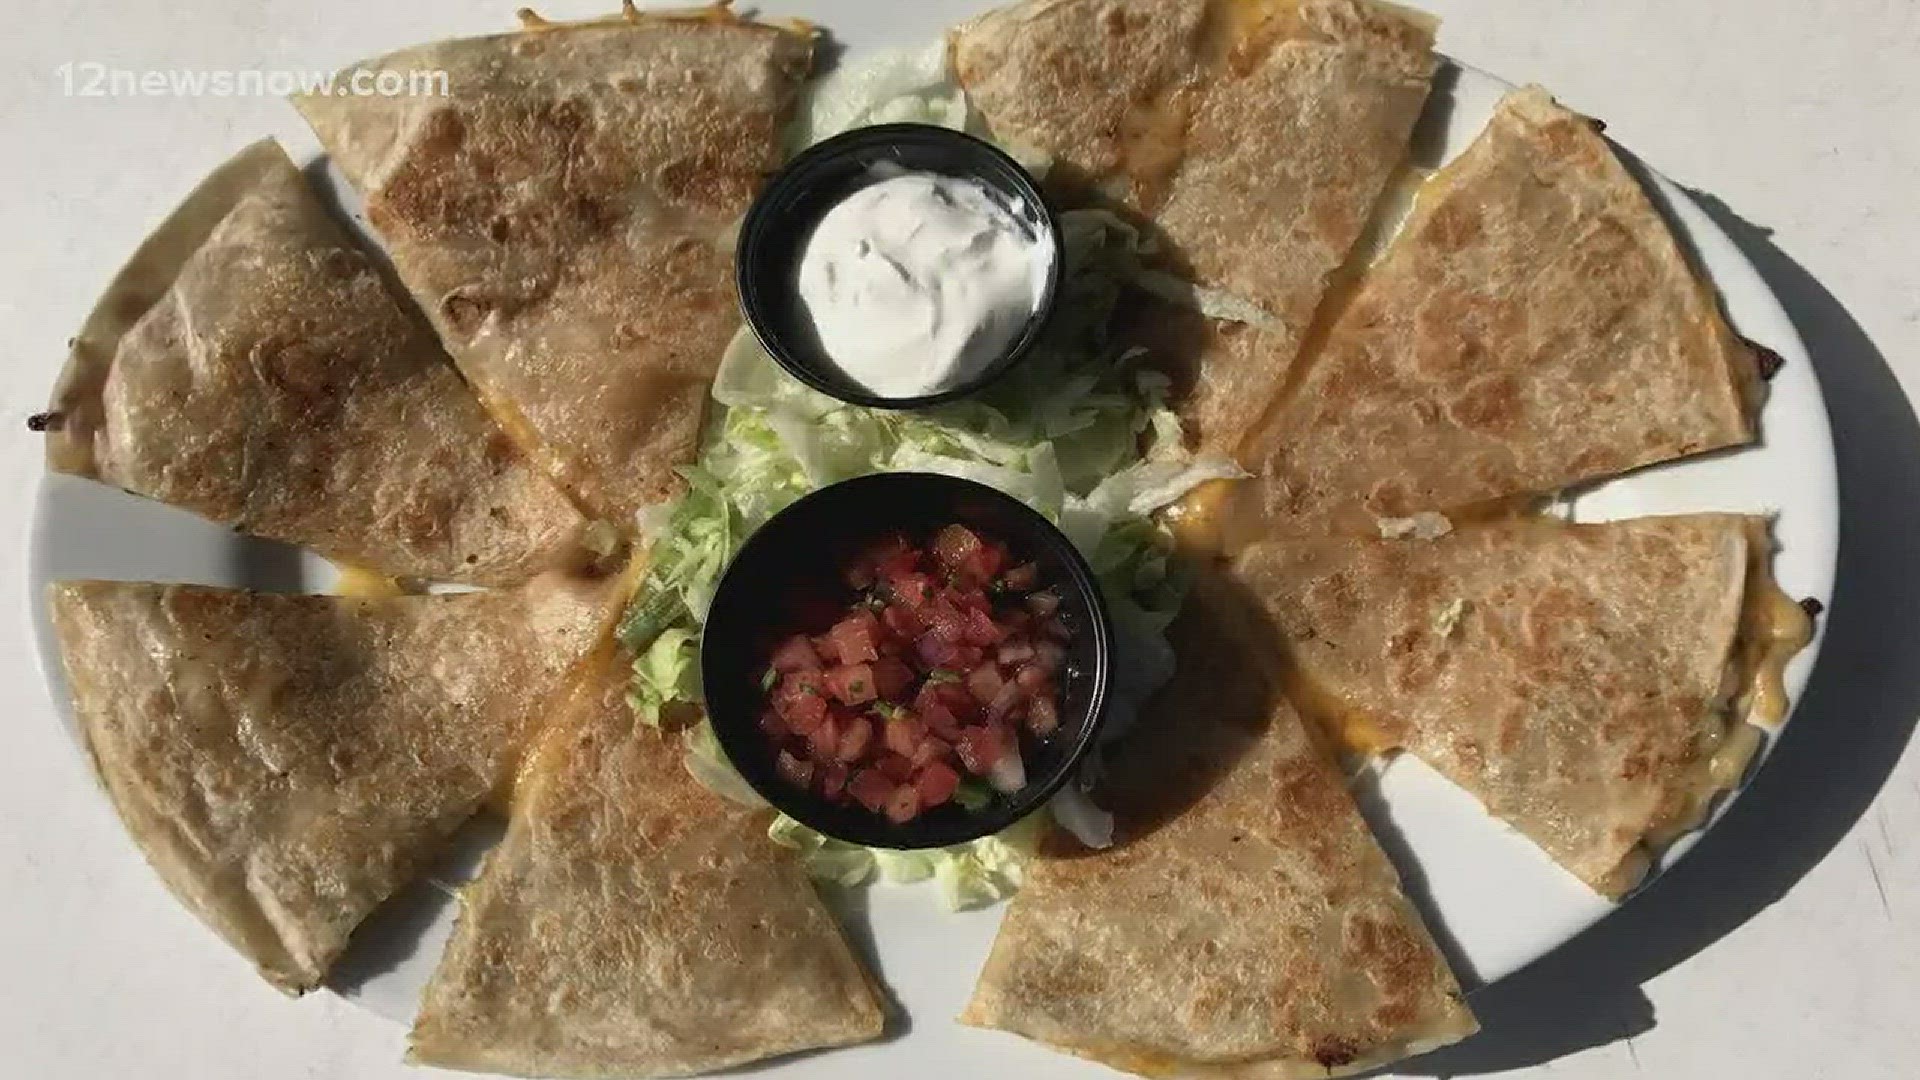 This week the Wheelhouse features their most popular appetizer: The Boudain Quesadilla!